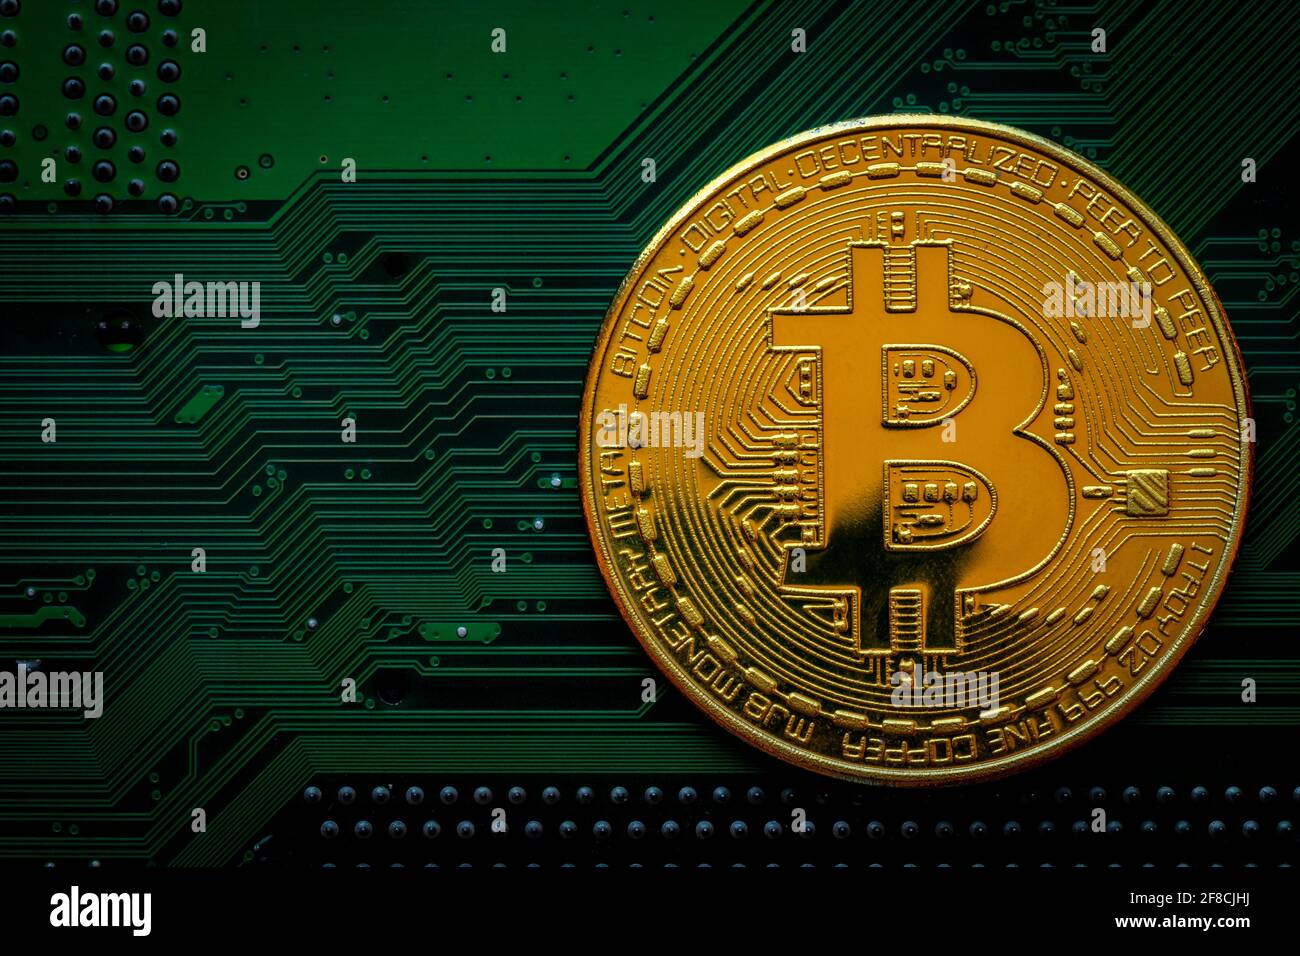 Golden coins with bitcoin symbol on green mainboard circuit background. Cryptocurrency, Money coin digital. Blockchain technology, bitcoin mining. Stock Photo